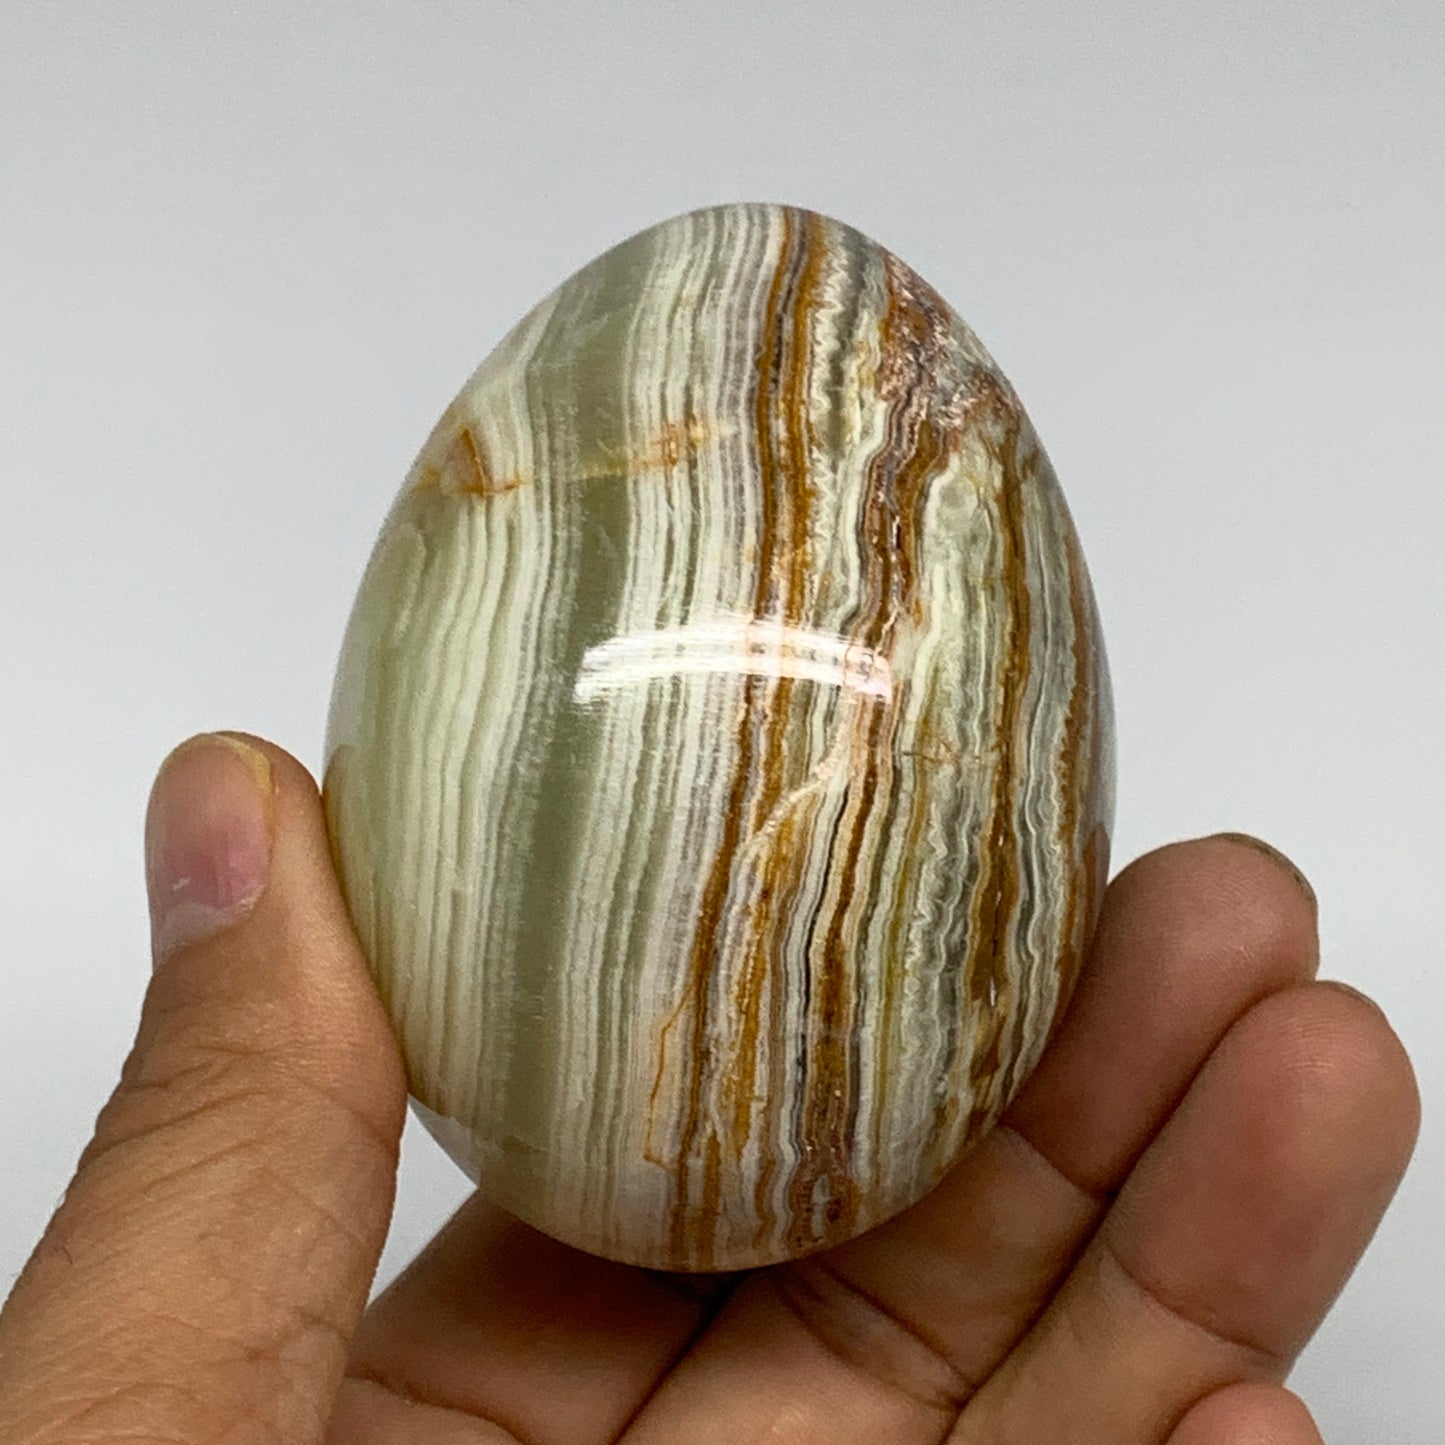 248g, 2.7"x2" Natural Green Onyx Egg Gemstone Mineral, from Pakistan, B32044